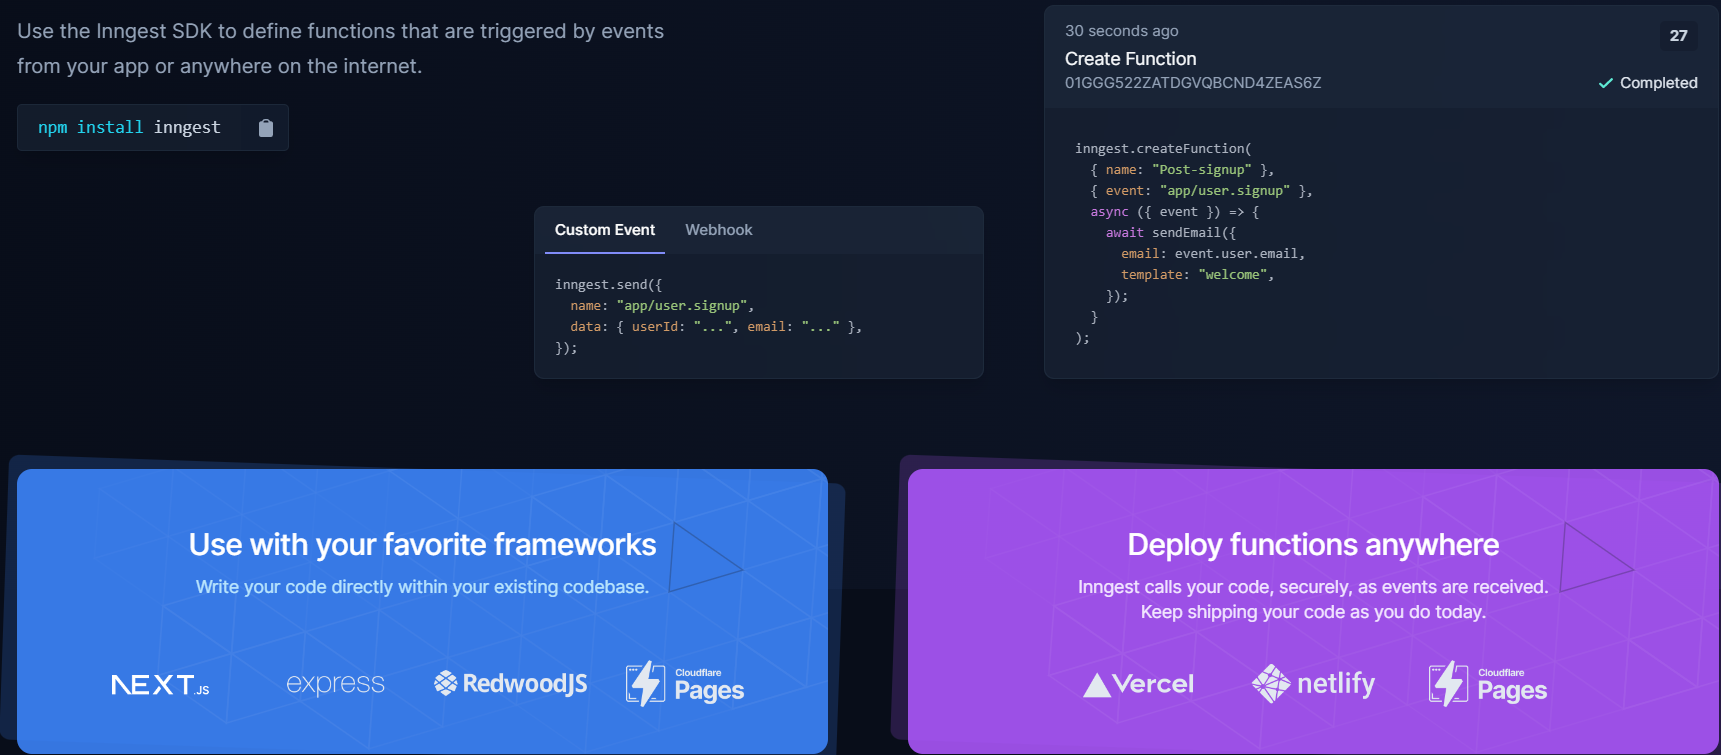 Ship Background Jobs, Crons, Webhooks, and Reliable Workflows in record time